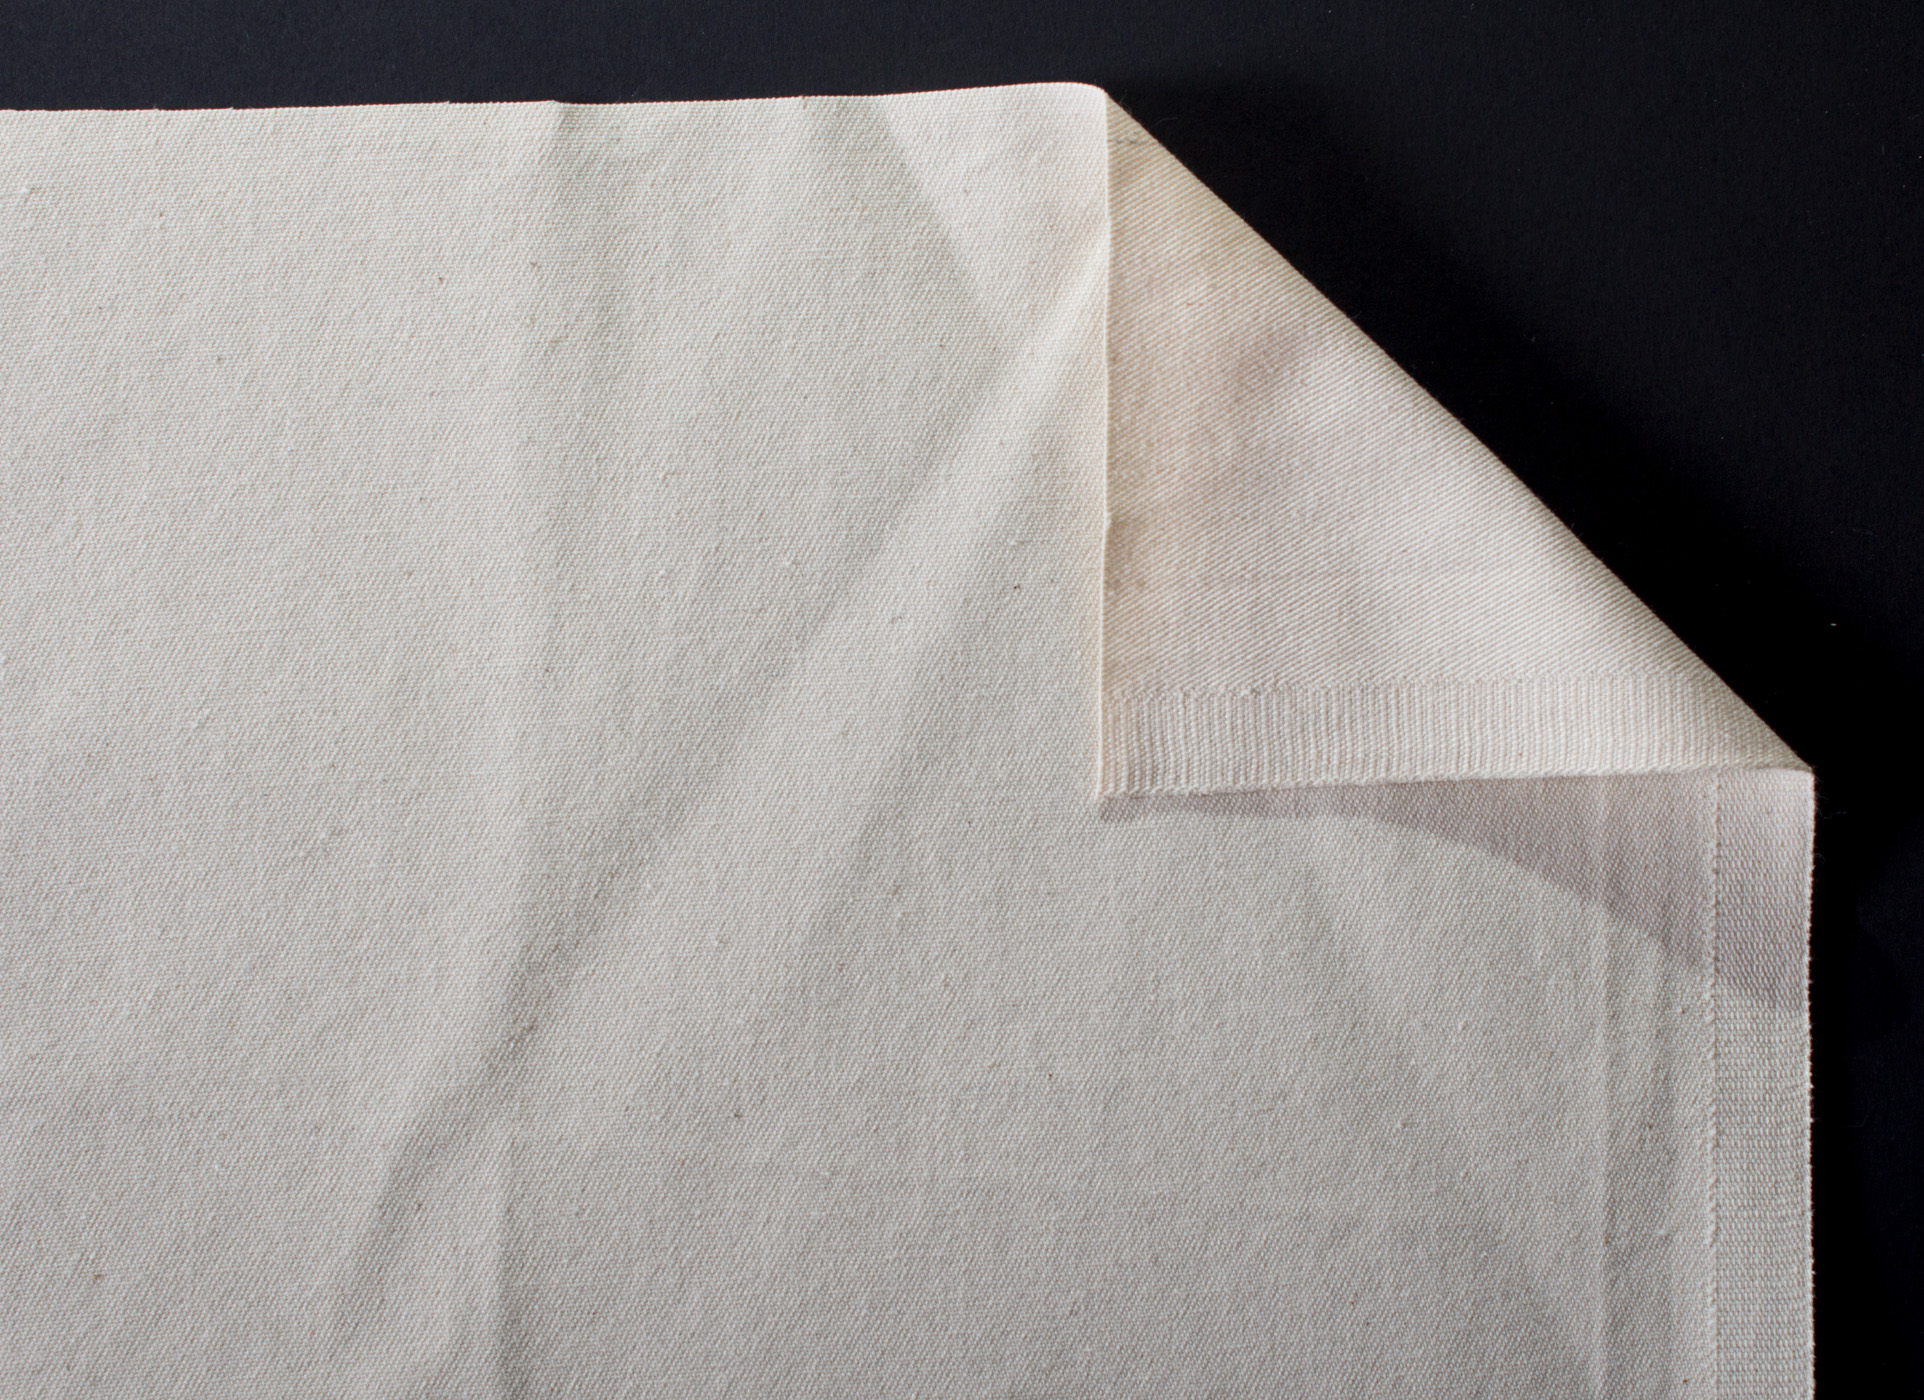 Unprimed cotton with  twill weave 260 g/m2, 2,15m wide, No.215